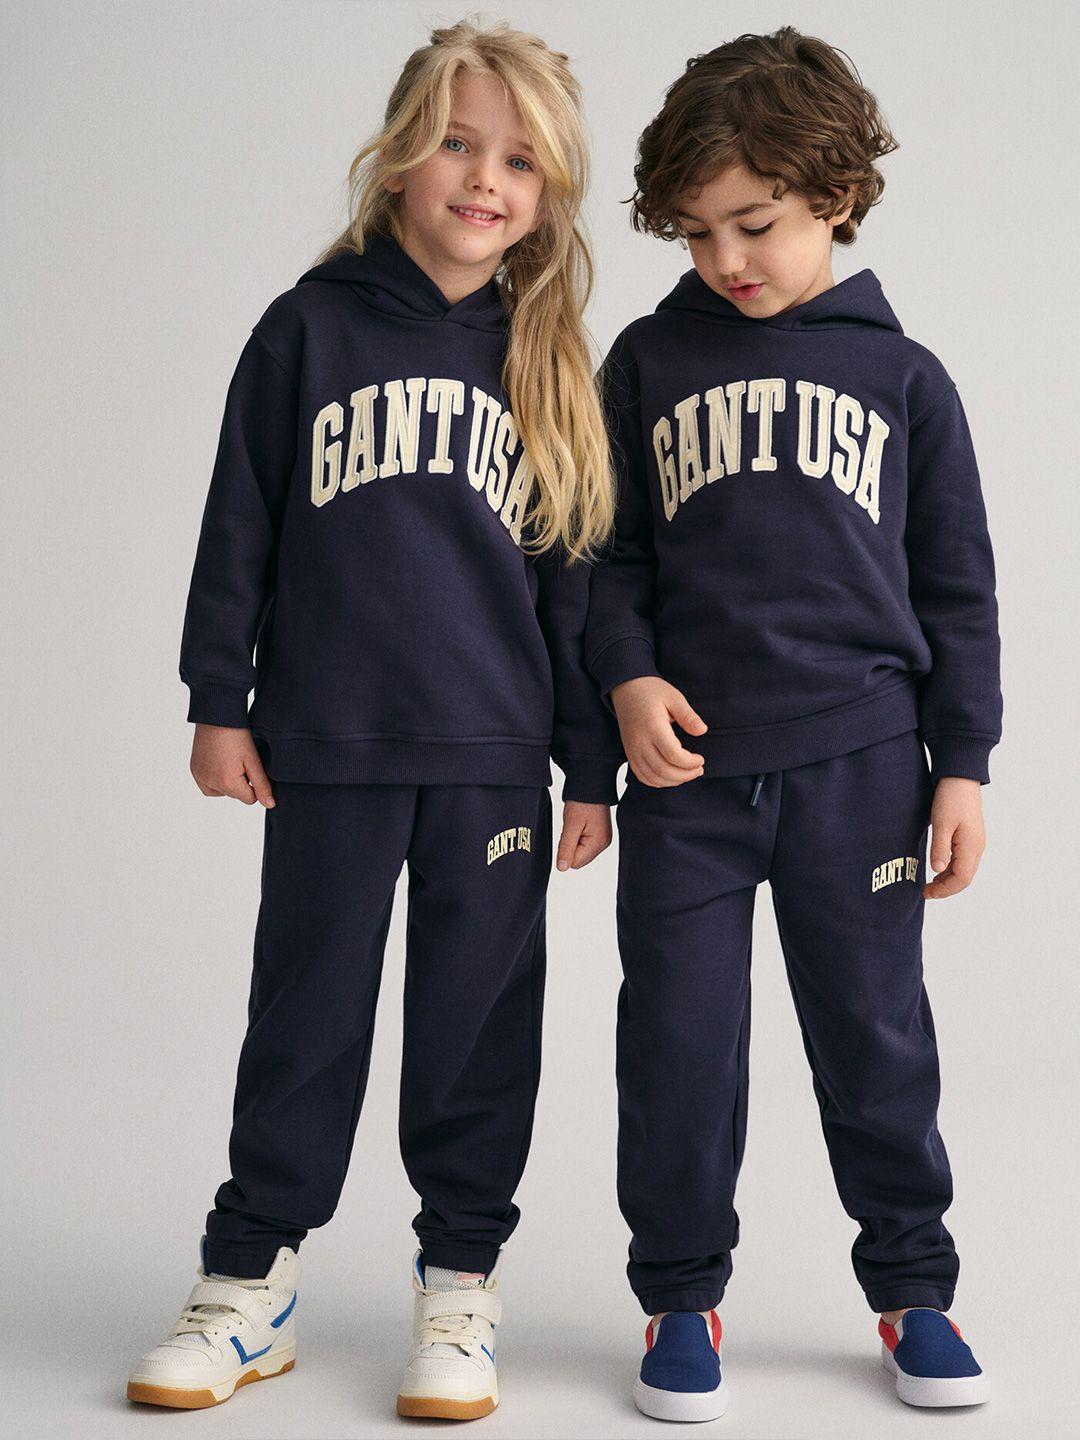 gant kids typography printed hooded pure cotton pullover sweatshirt